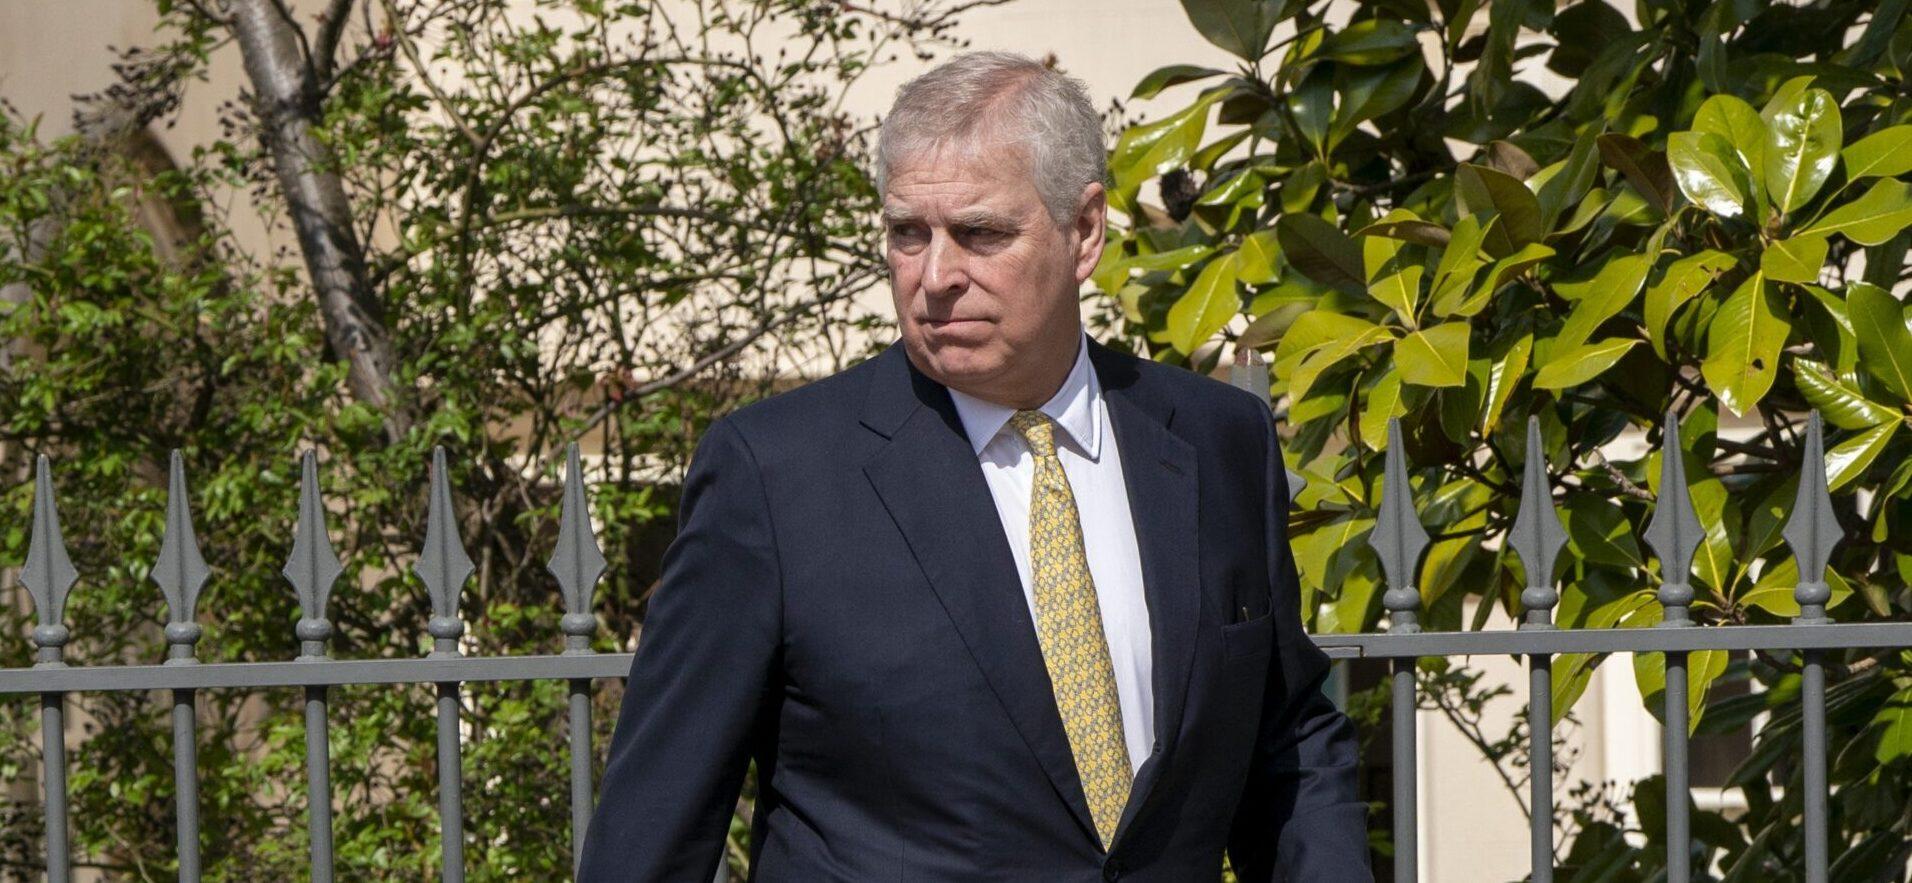 Prince Andrew Makes First Public Appearance Since Epstein ‘List’ Release [PHOTOS]